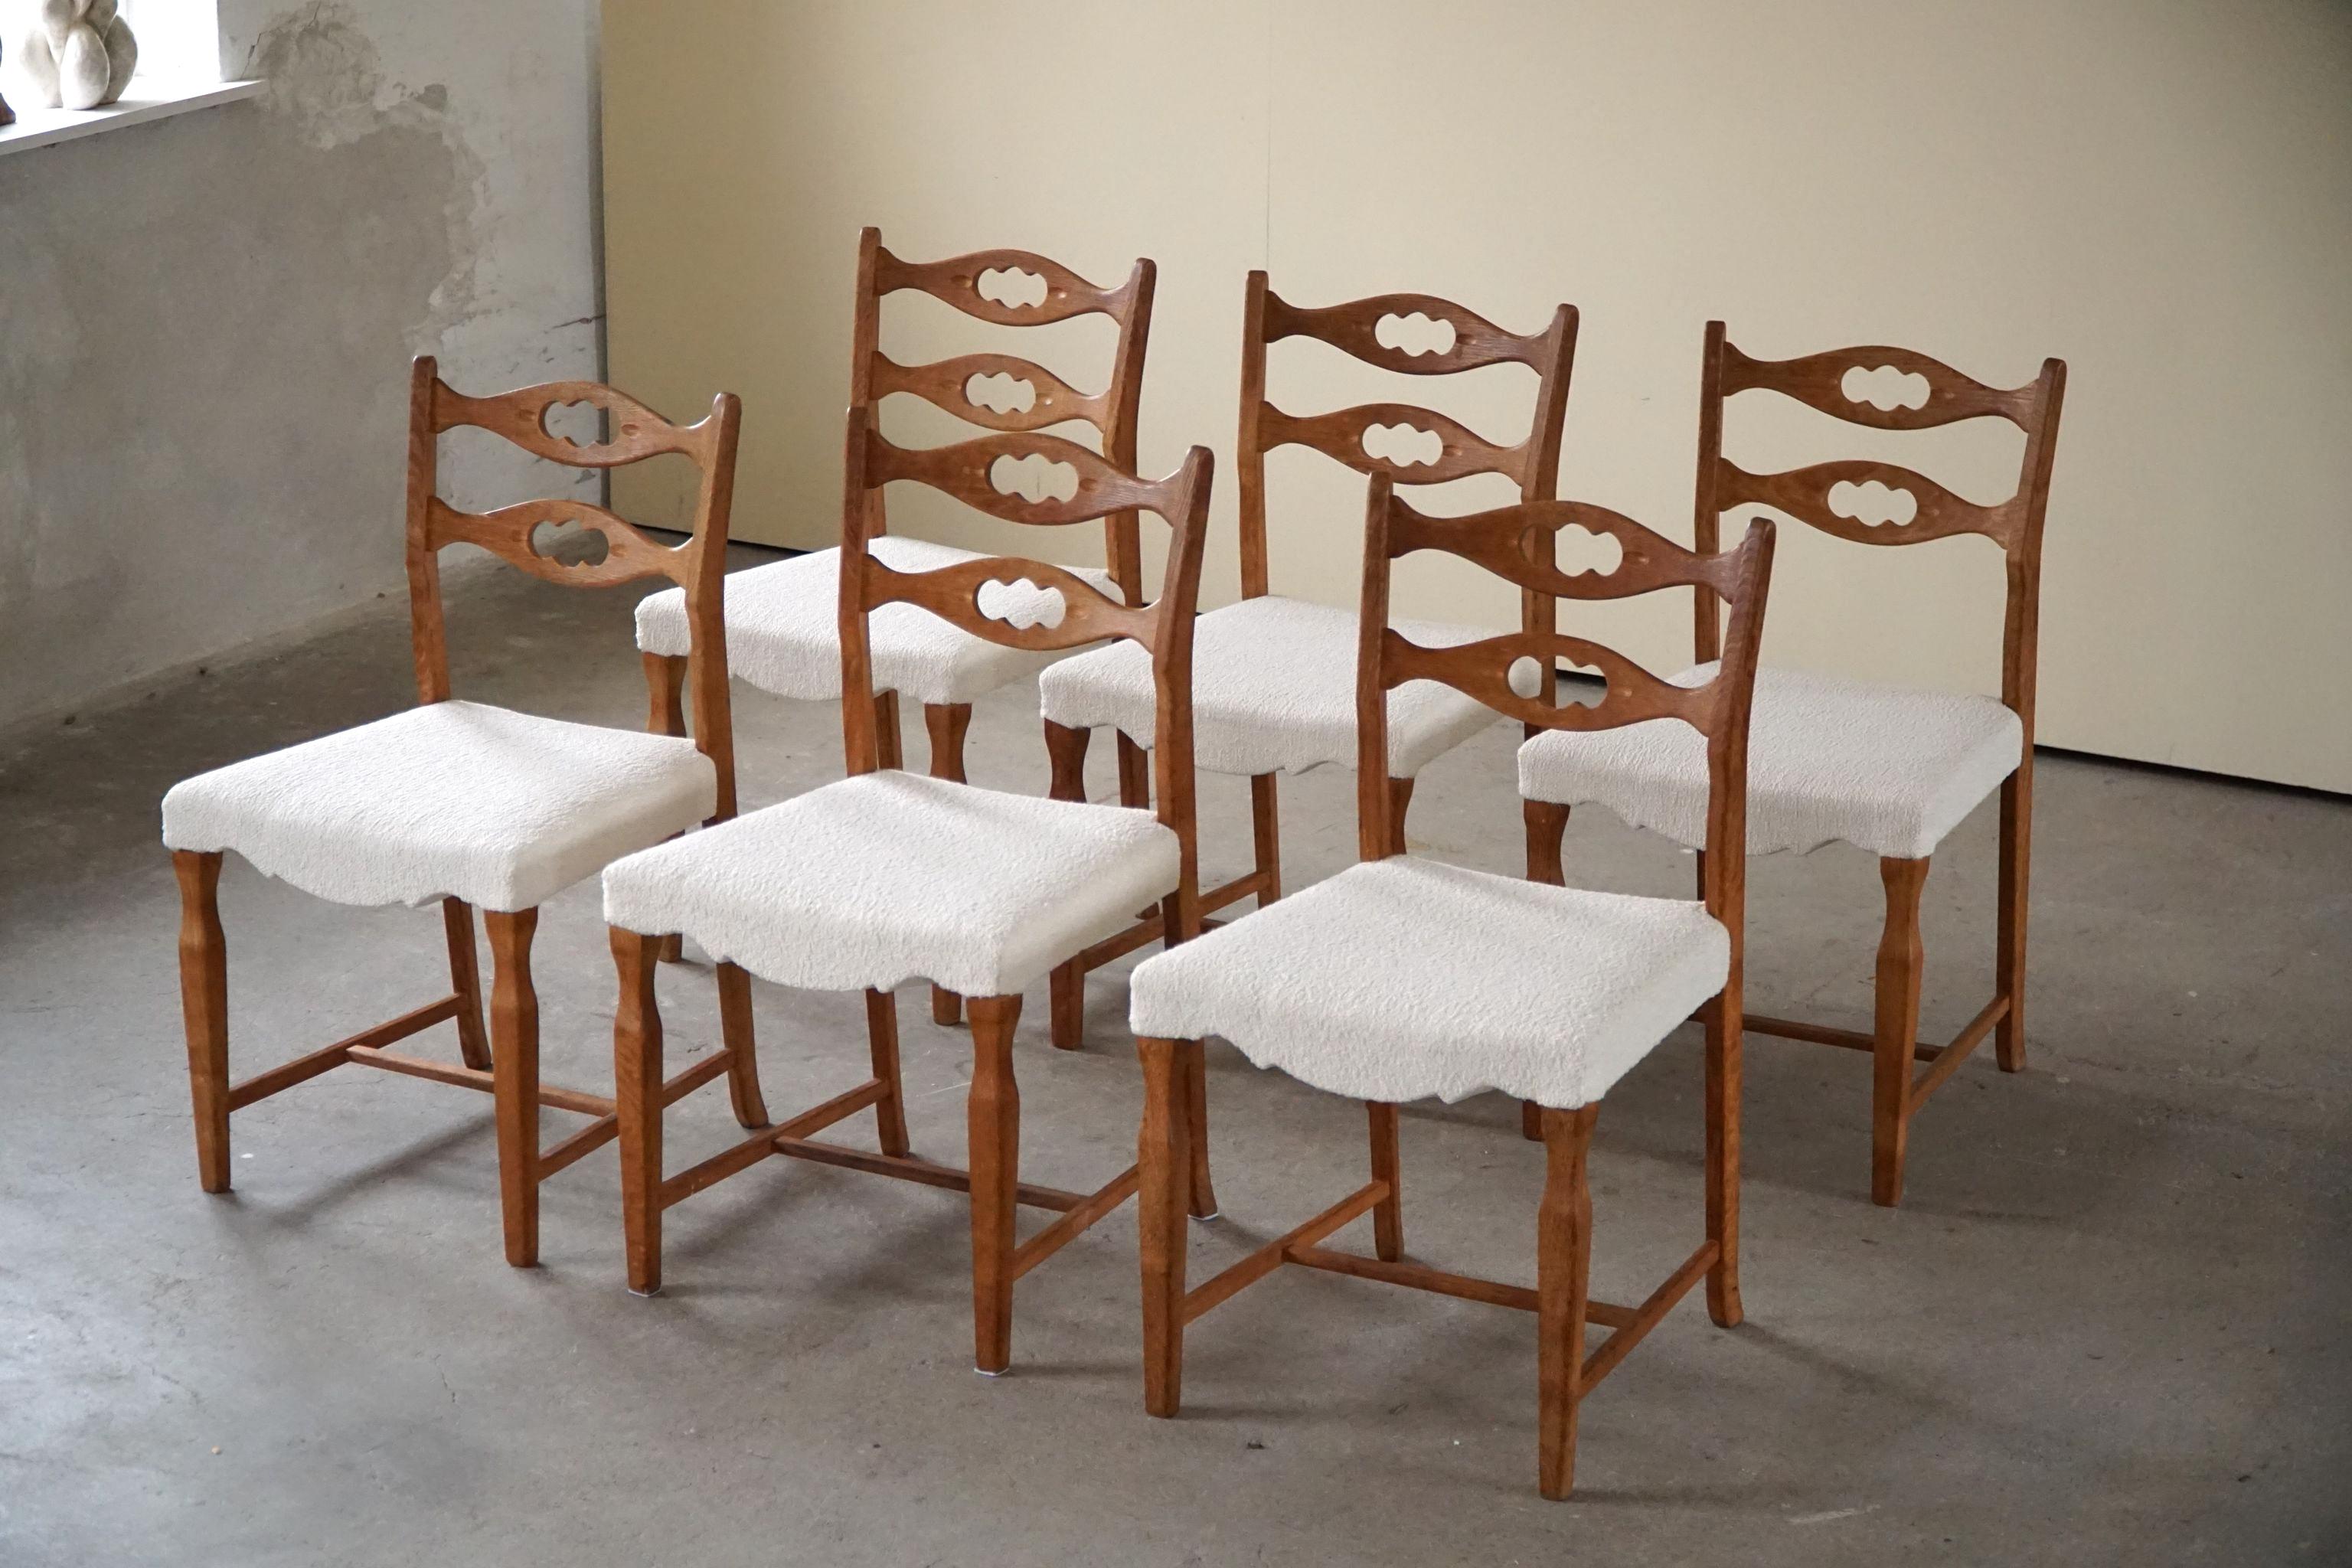 A sculptural classic set of 6 dining chairs in oak, seats reupholstered in white bouclé. Strong references to the popular 